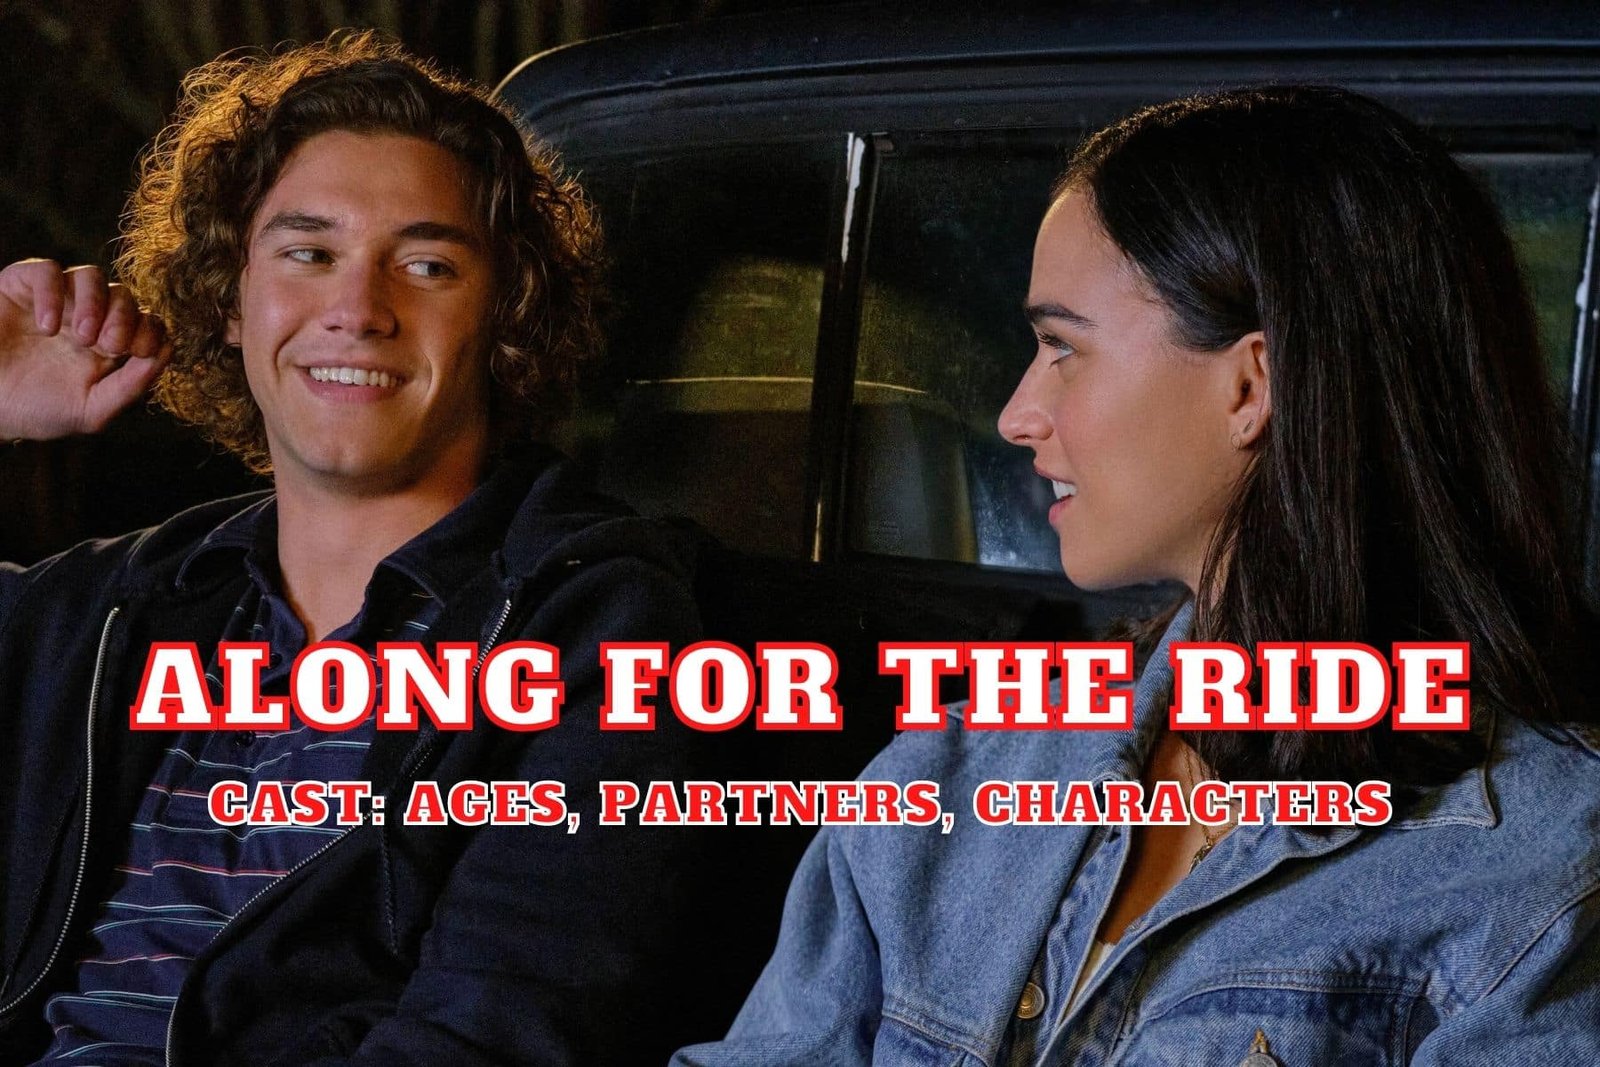 Along for the Ride Cast - Ages, Partners, Characters